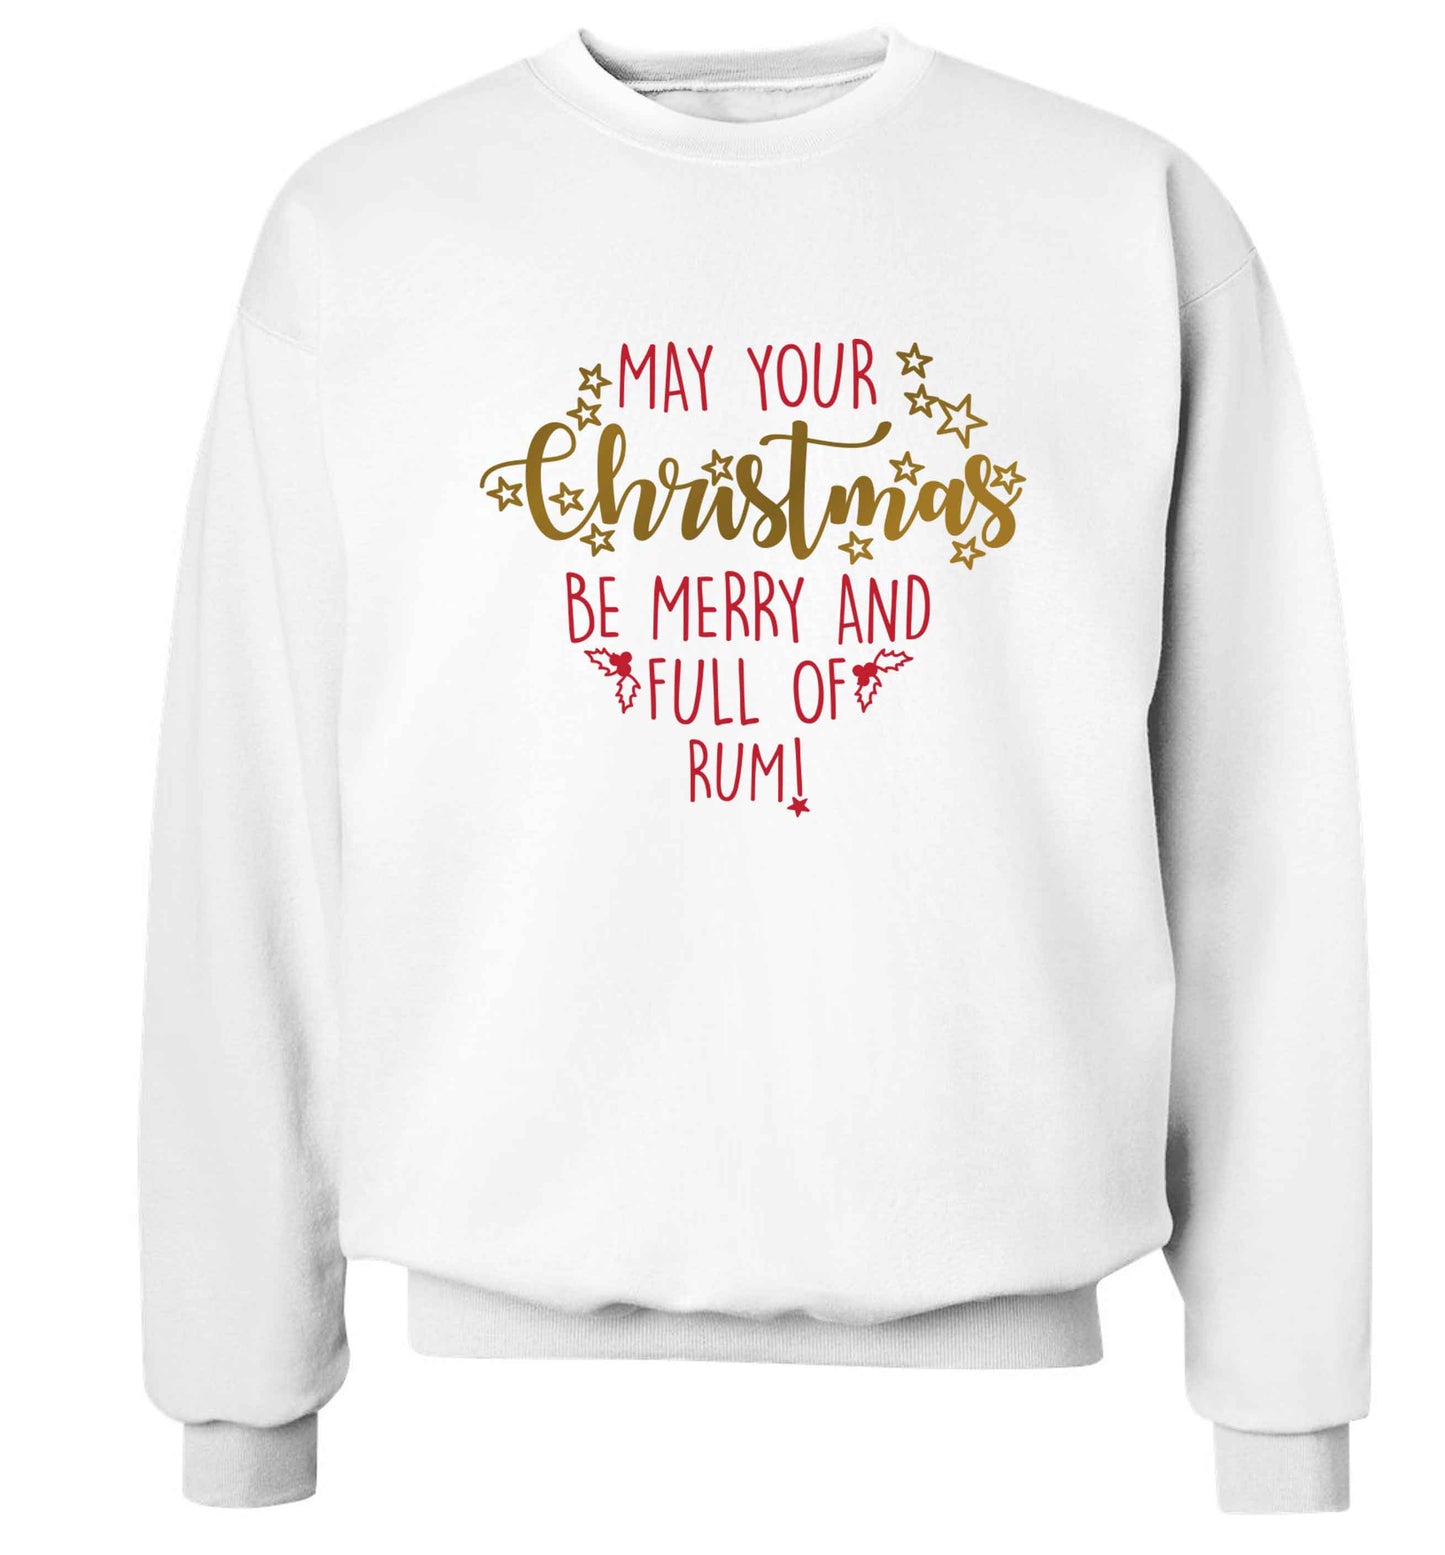 May your Christmas be merry and full of rum Adult's unisex white Sweater 2XL